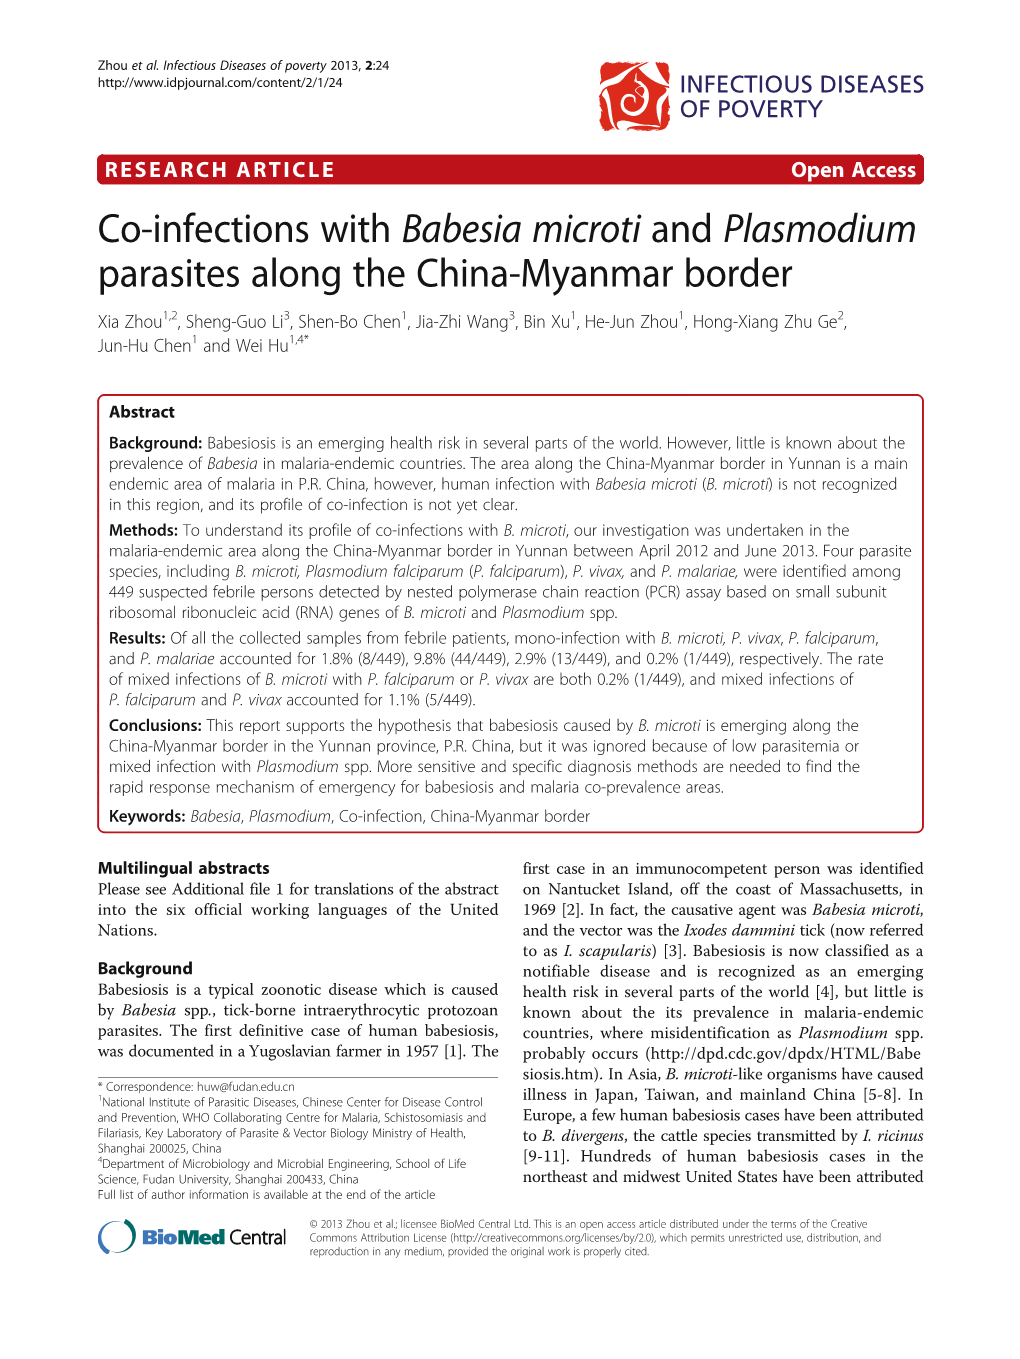 Co-Infections with Babesia Microti and Plasmodium Parasites Along The